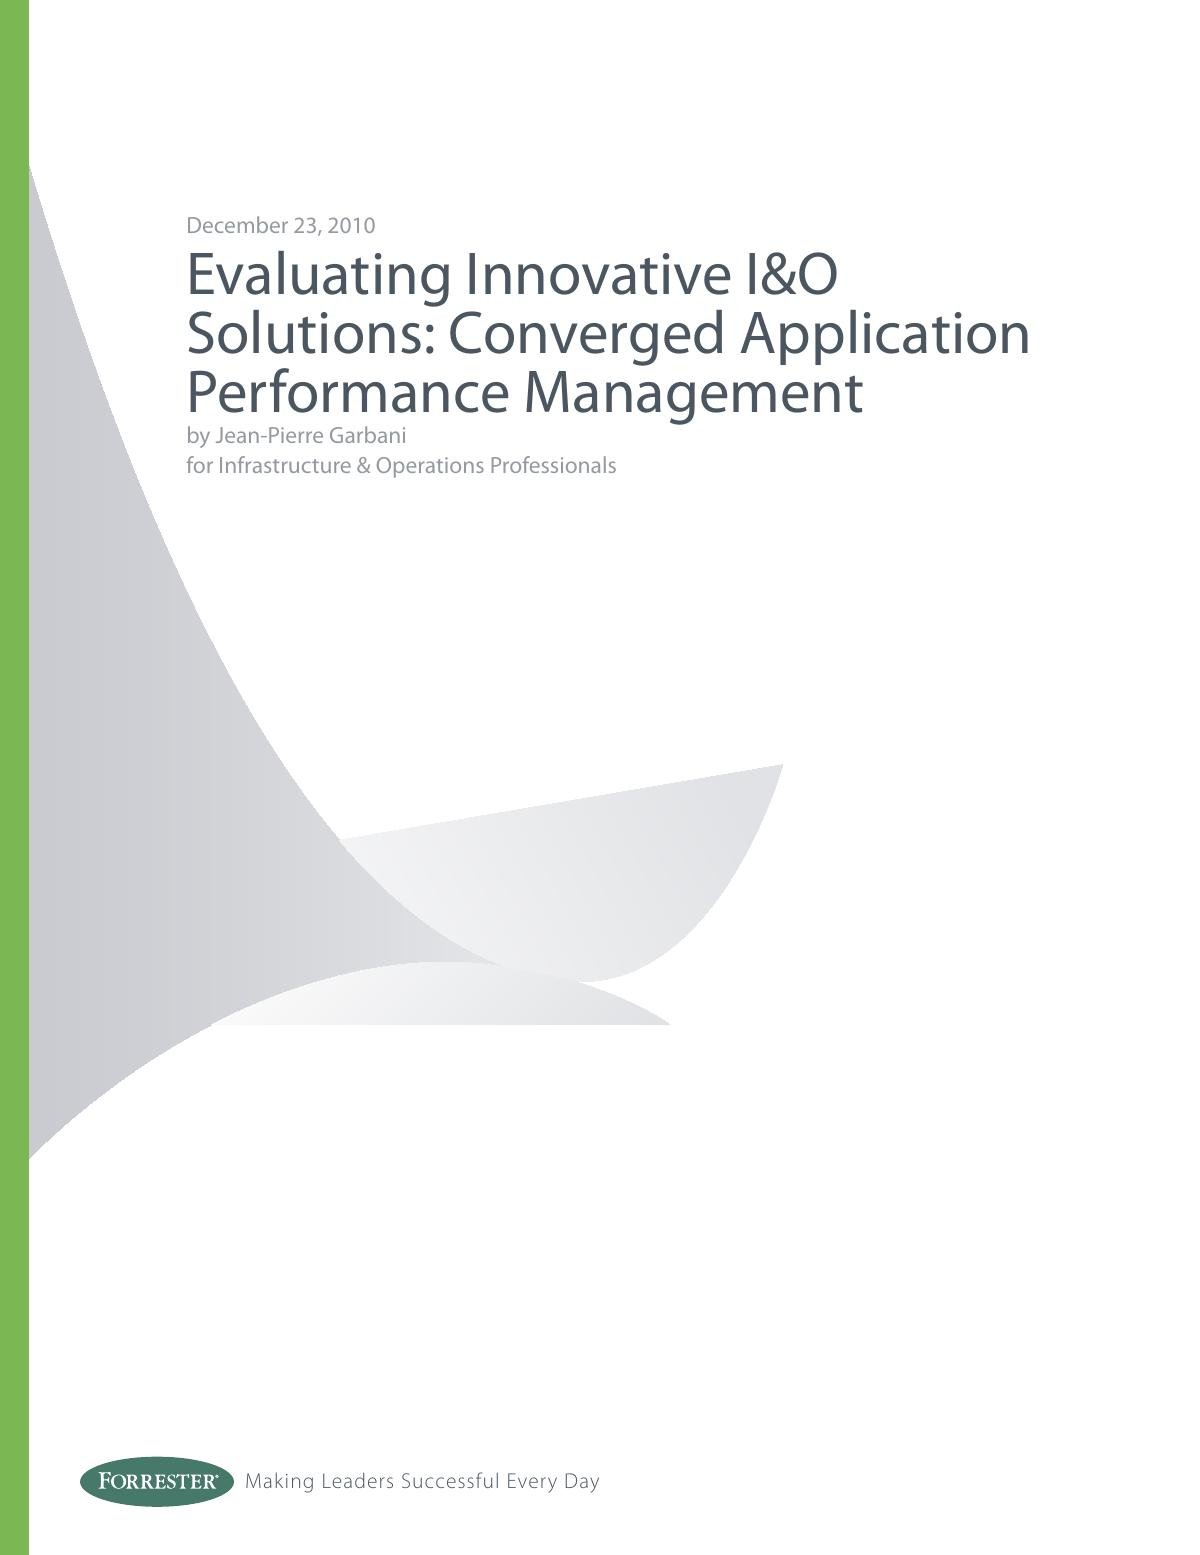 Forrester Research: Evaluating Innovative I&O Solutions: Converged Application Performance Managemen